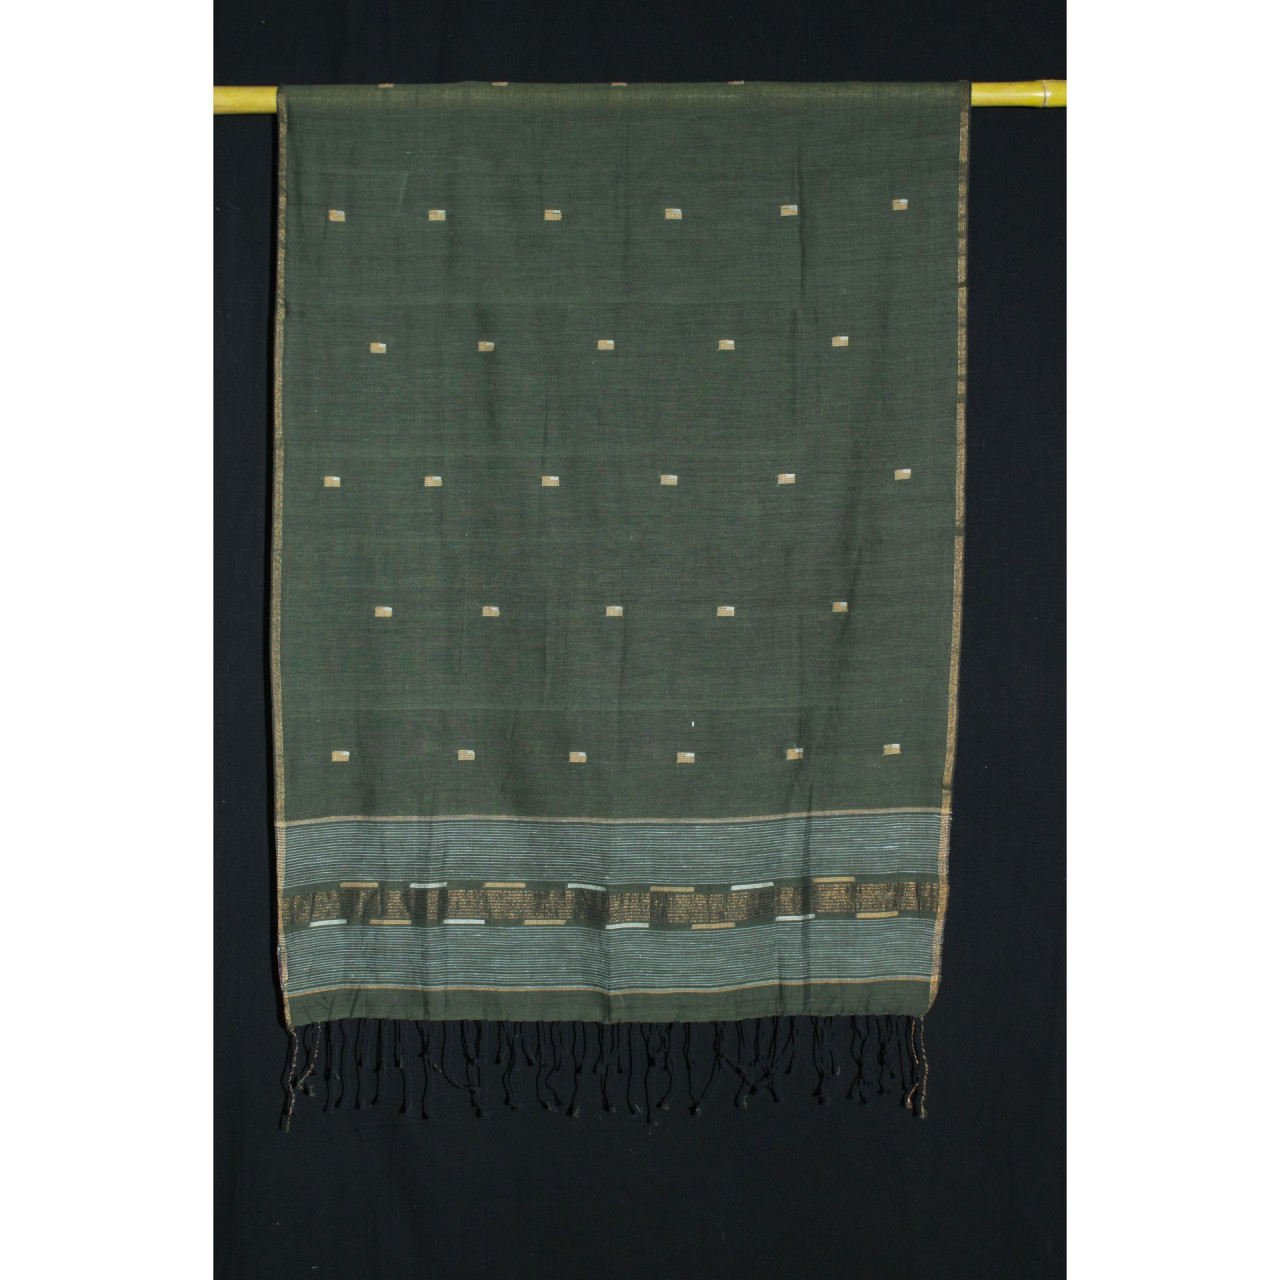 (1800) Cotton and khadi  Azo-free dyed stole from Shantipur with motifs - Green, black, golden, motif